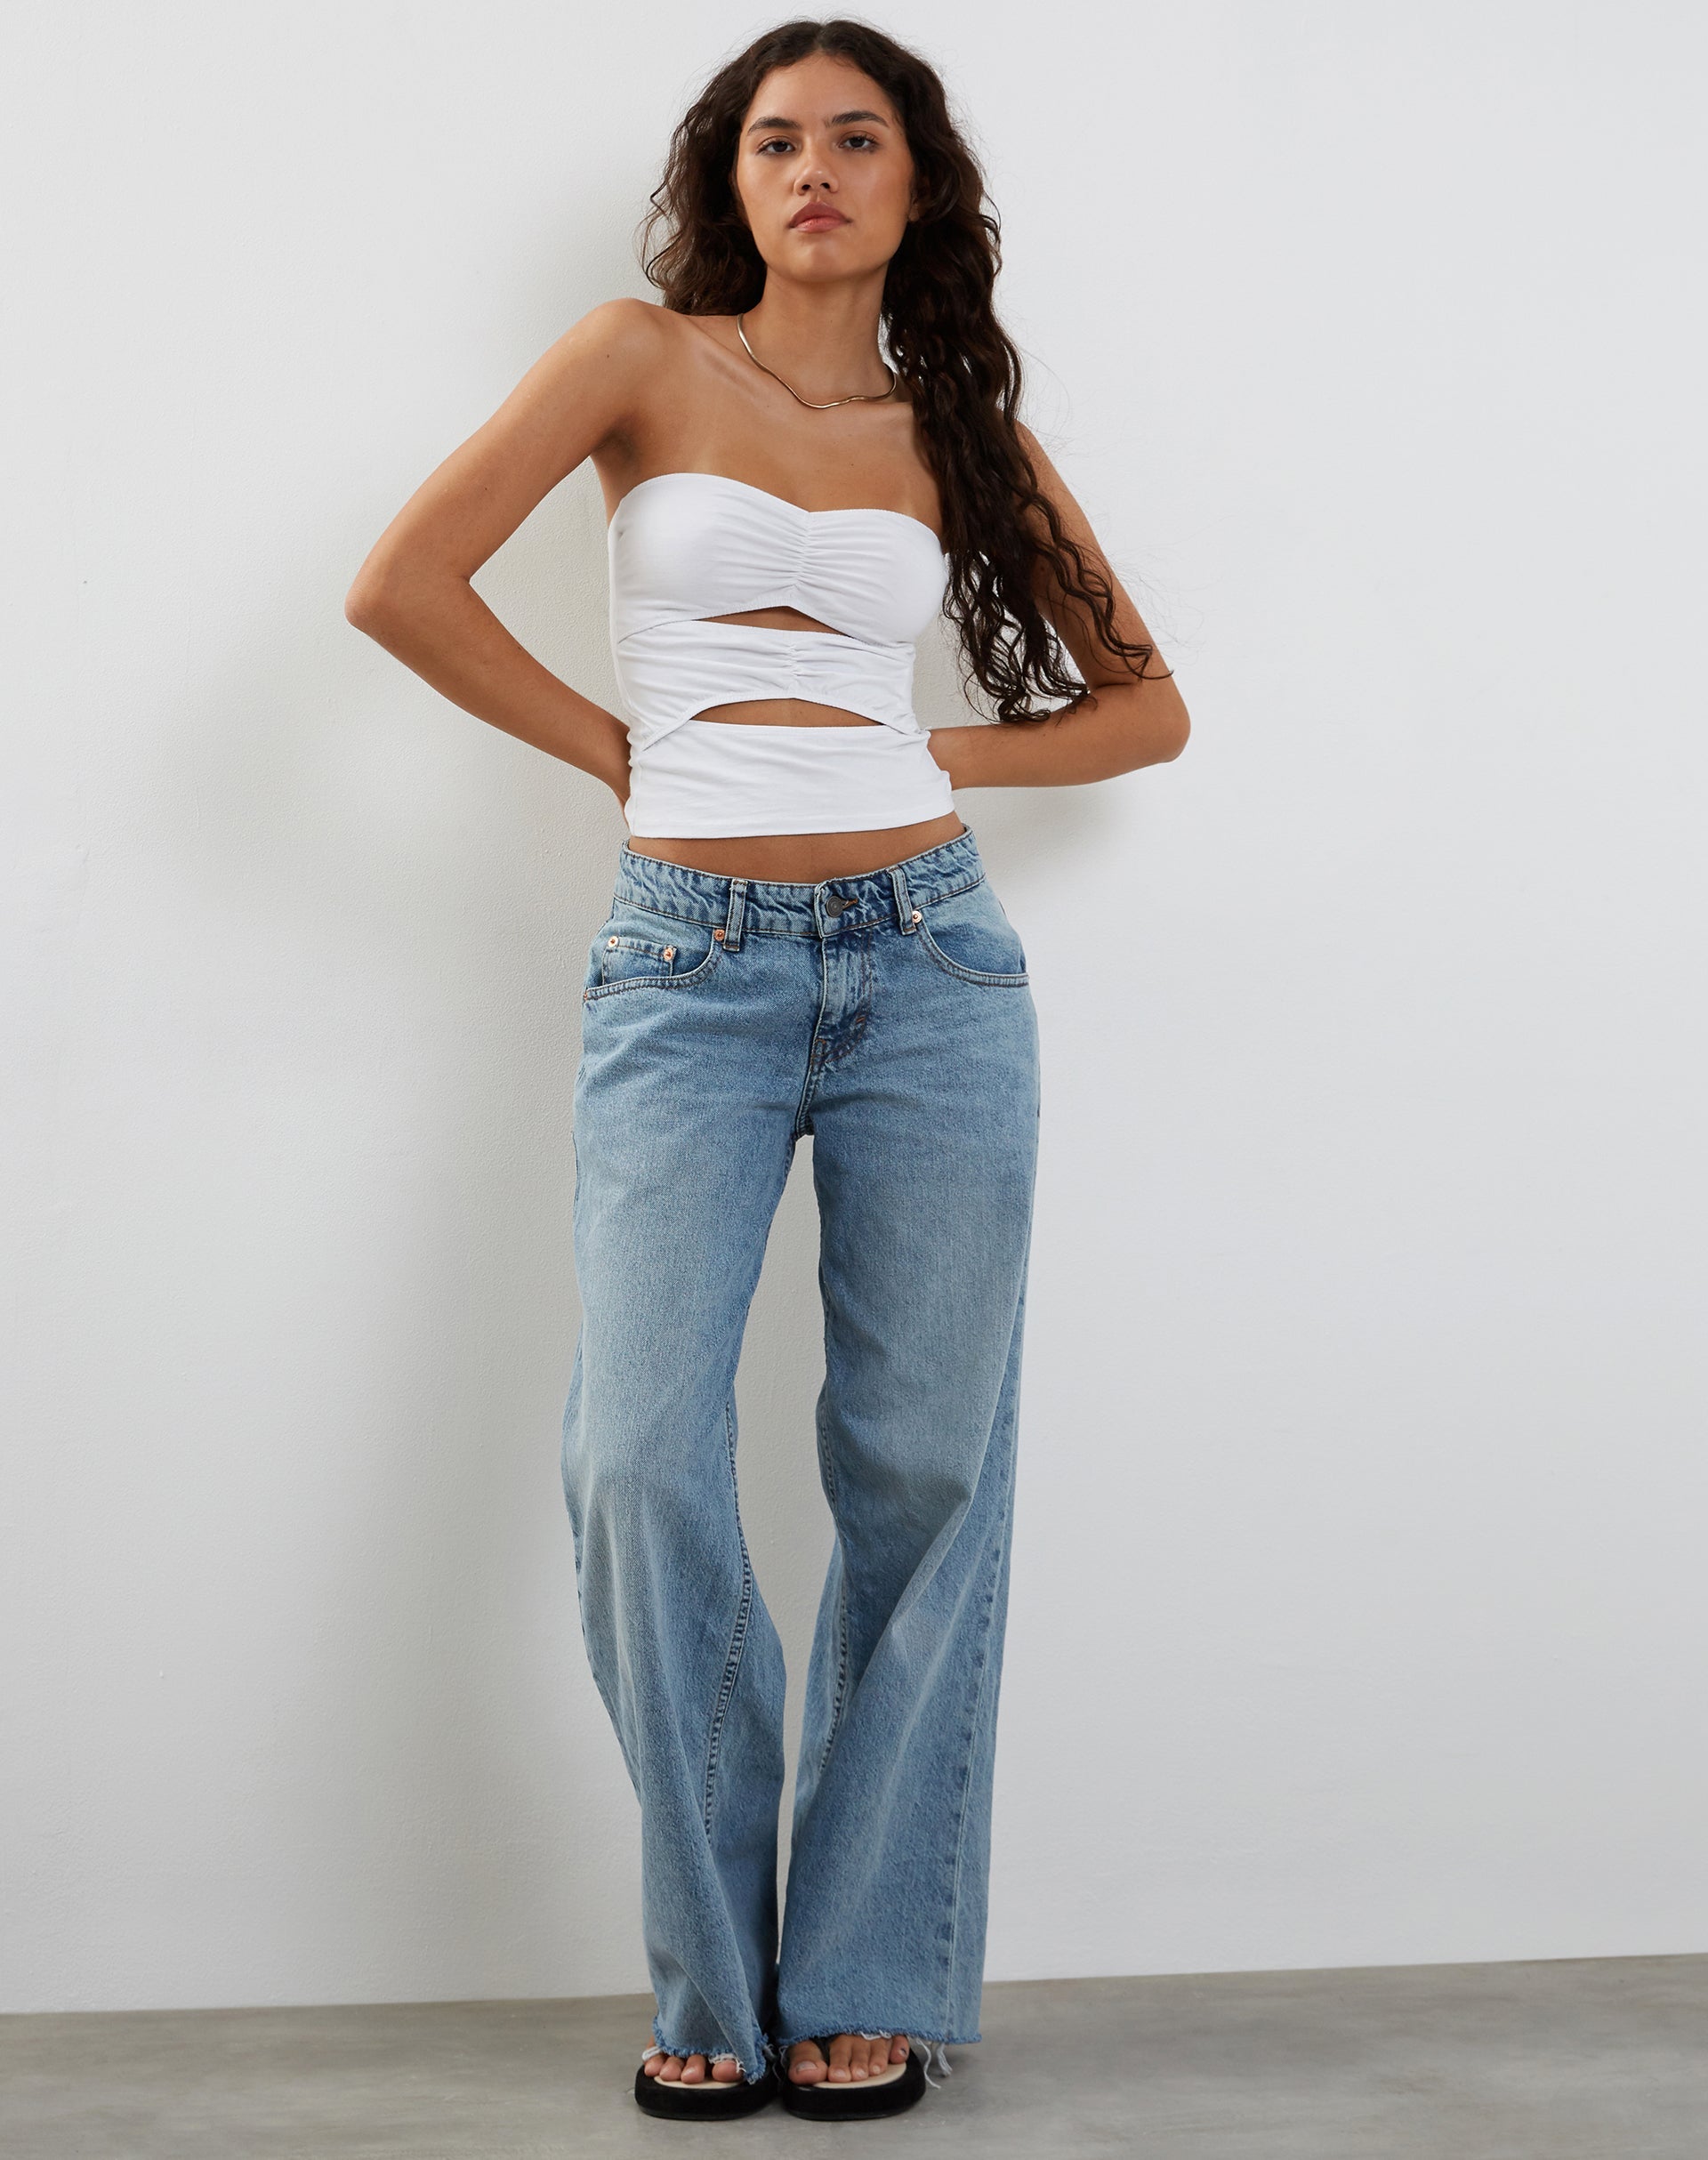 Image of Dayu Bandeau Crop Top in White